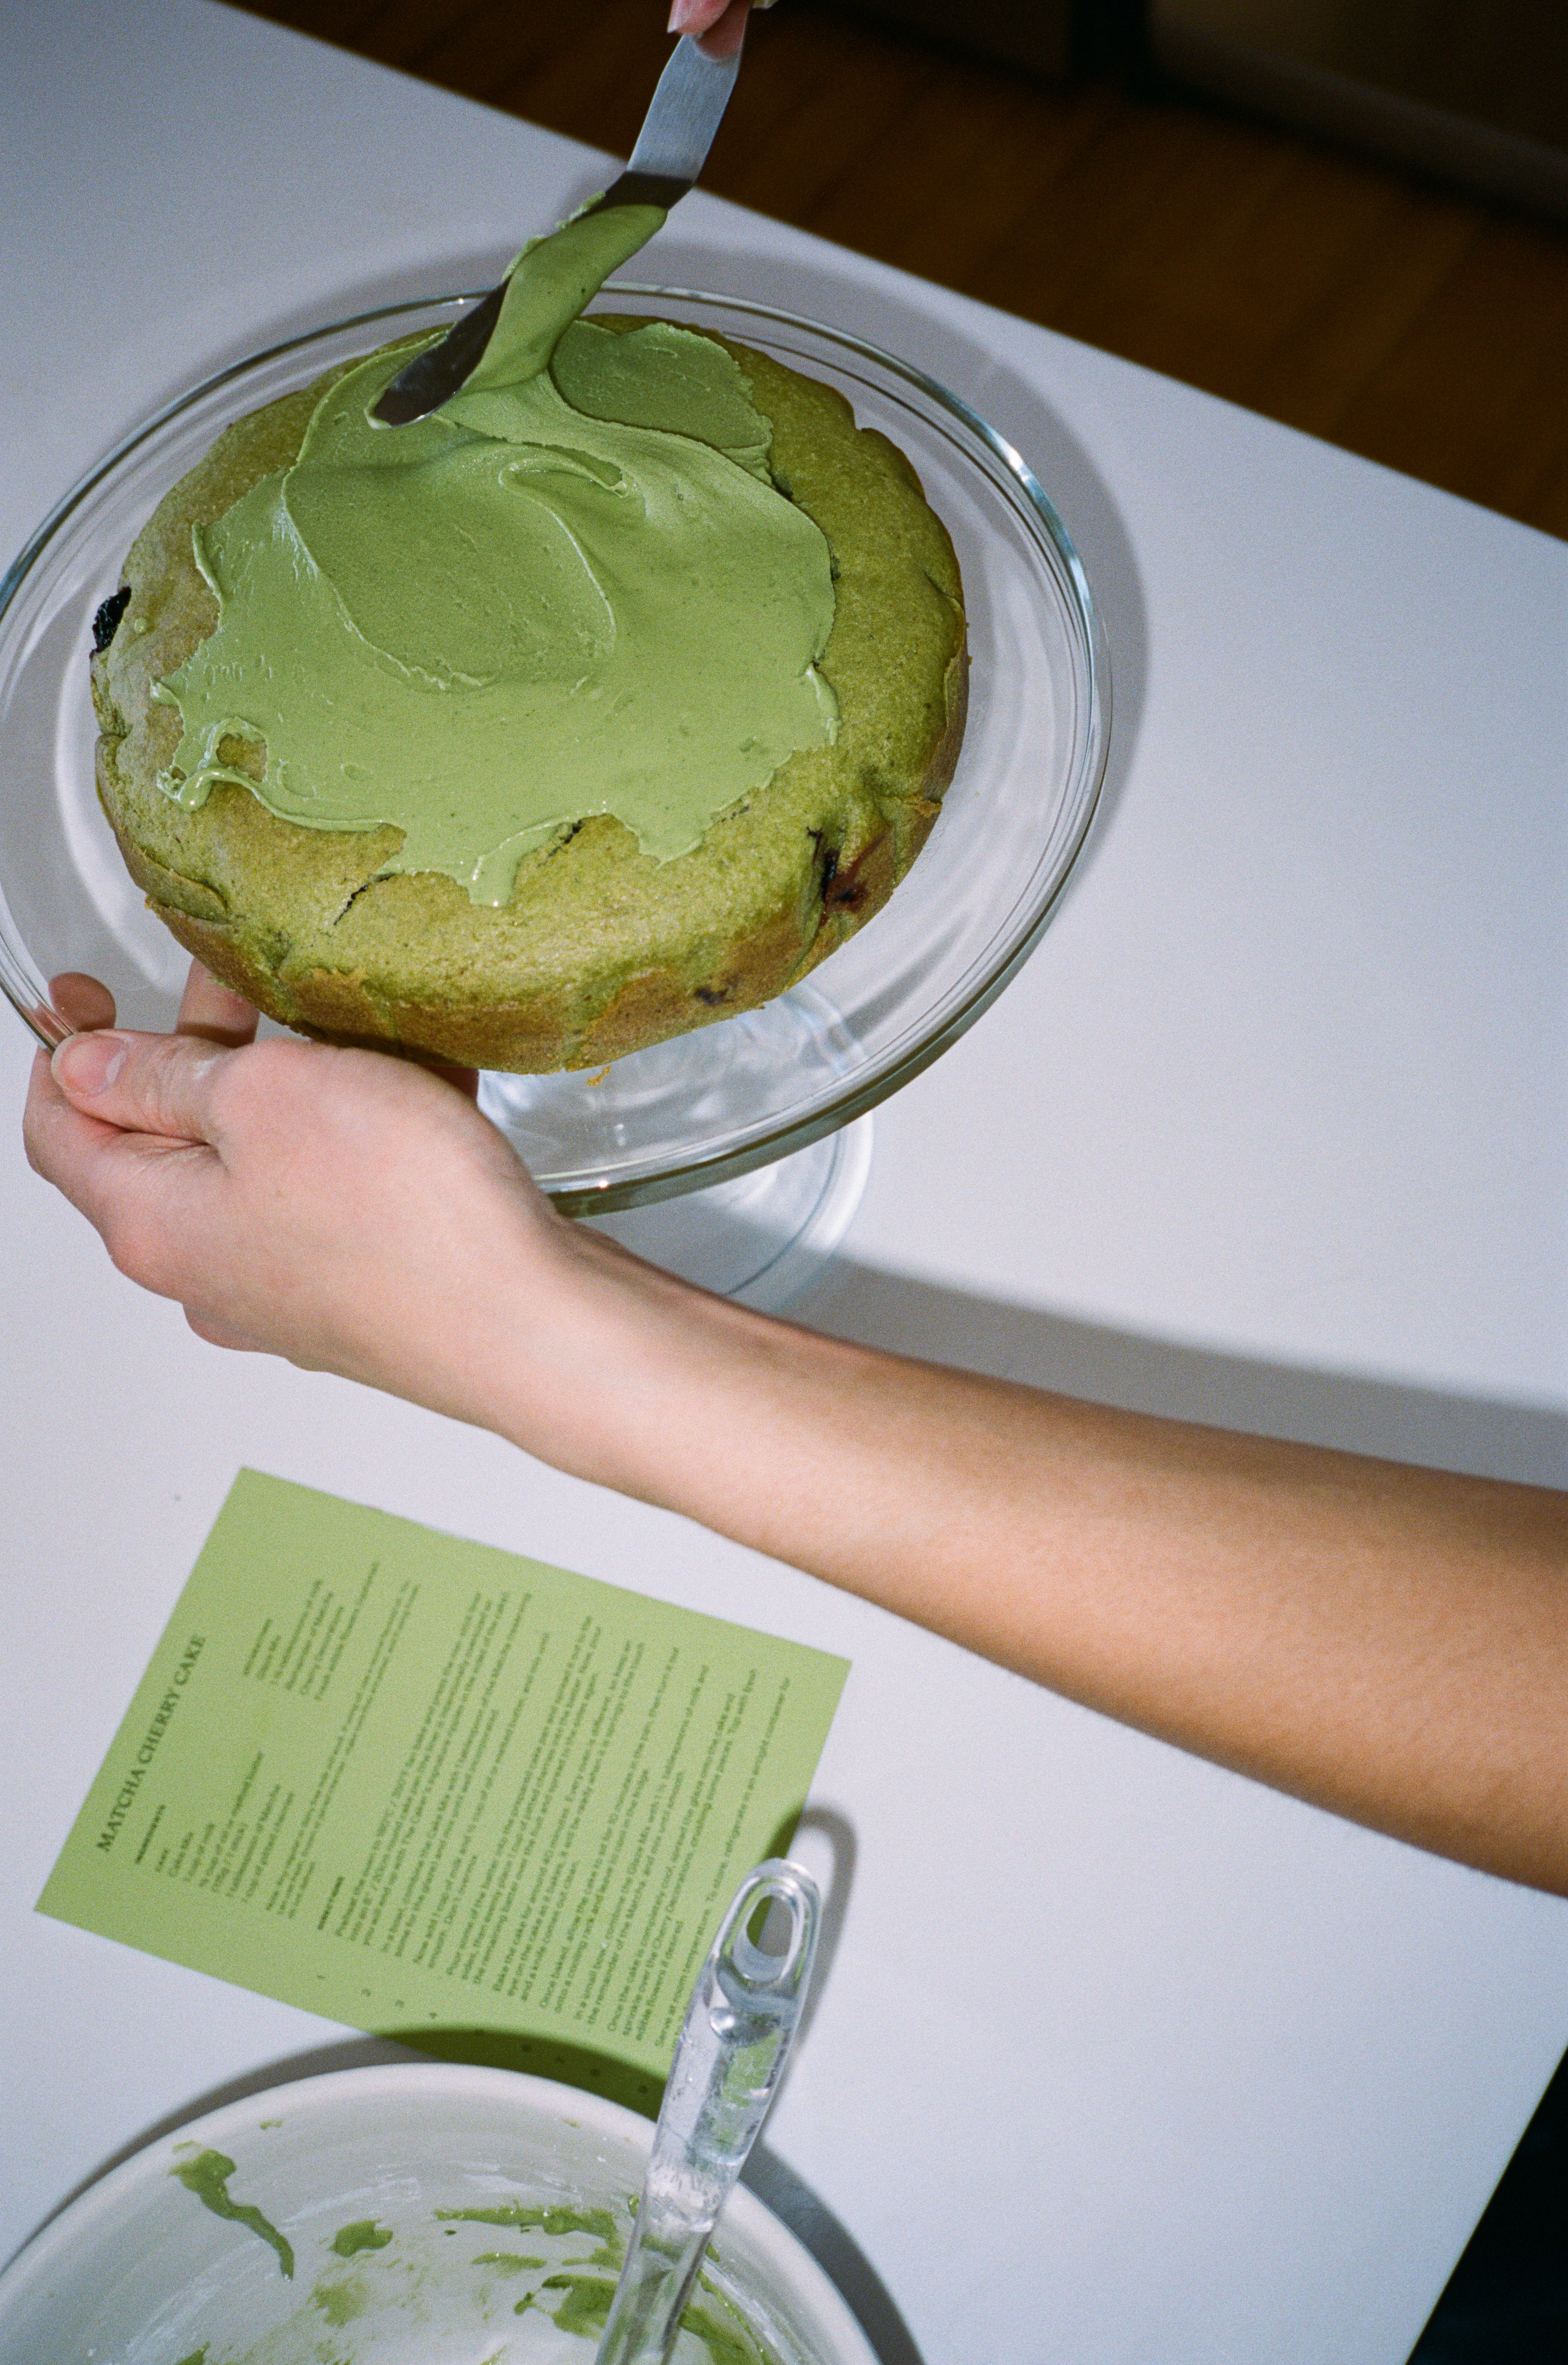 Matcha Cherry Cake Kit (25% OFF)Editorial Image  of person making cake